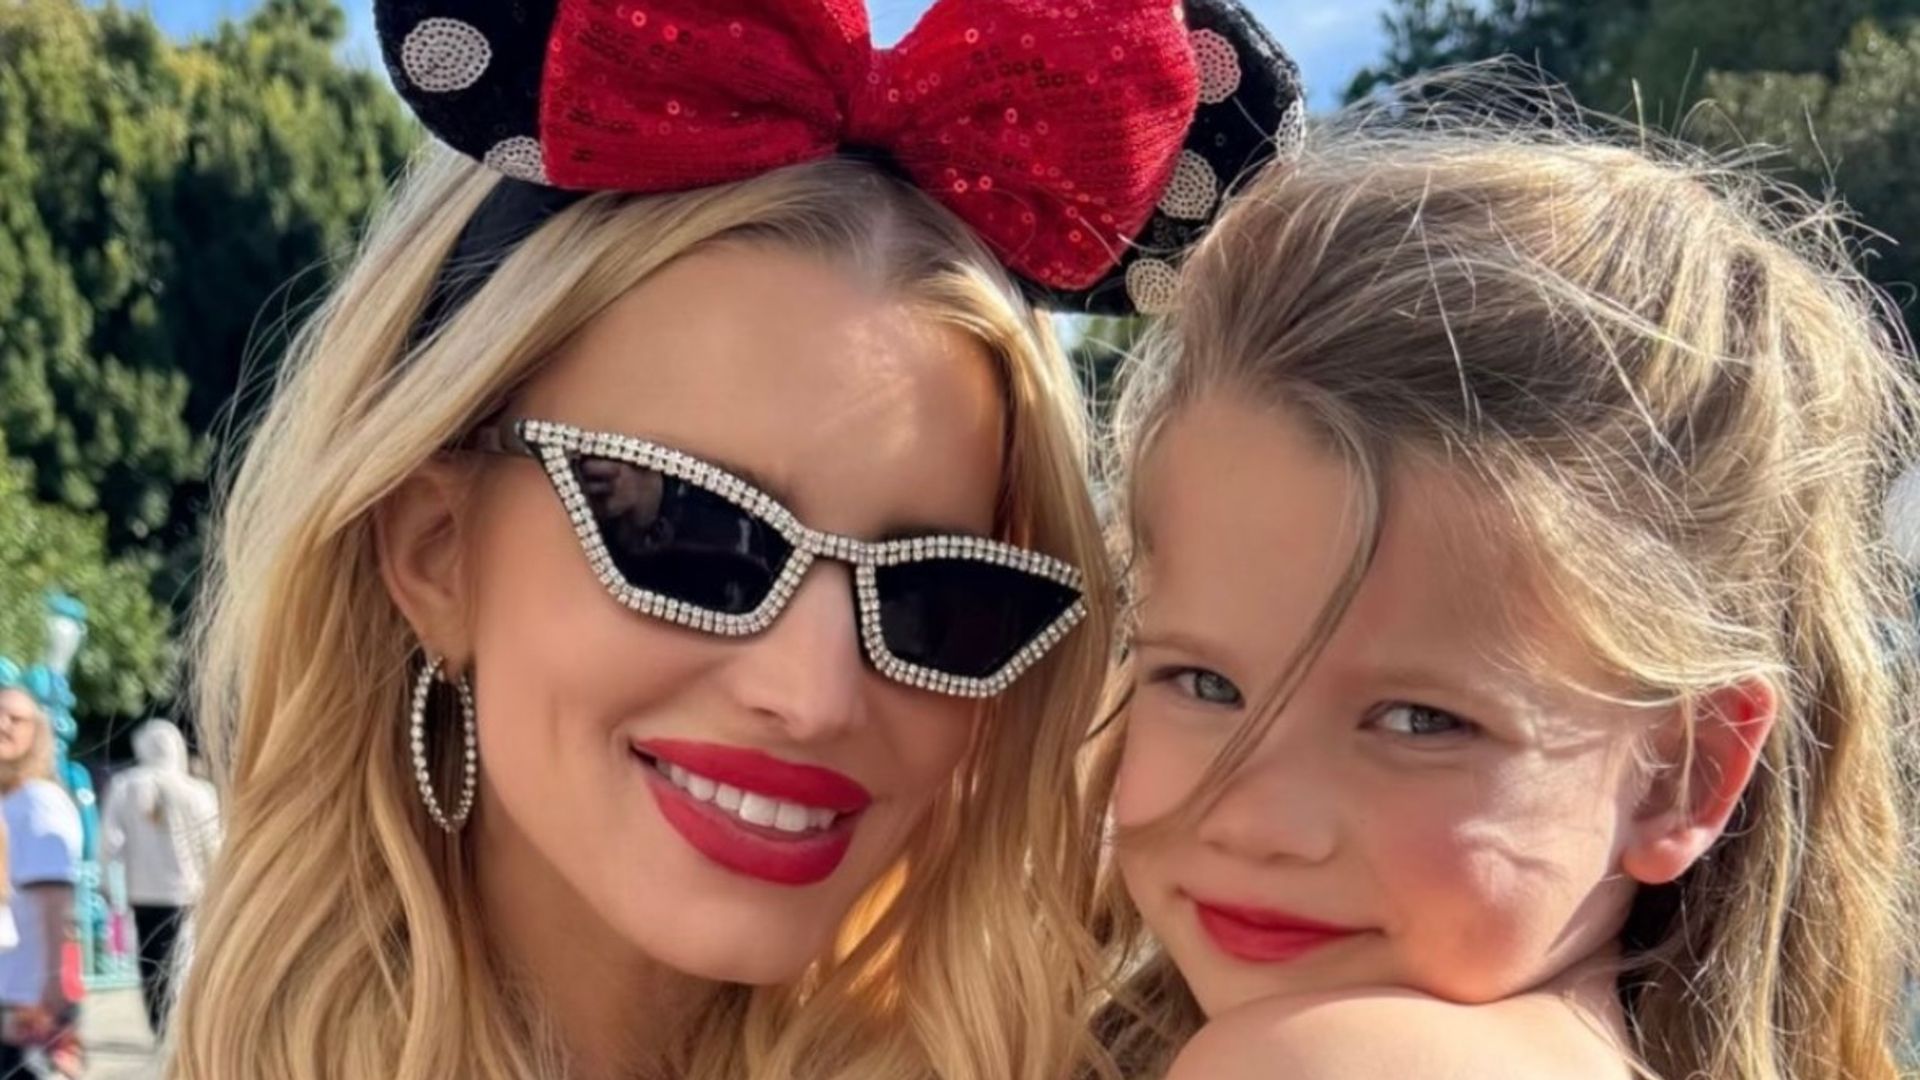 Jessica Simpsons youngest daughter is her twin in adorable new family photos from 5th birthday celebrations